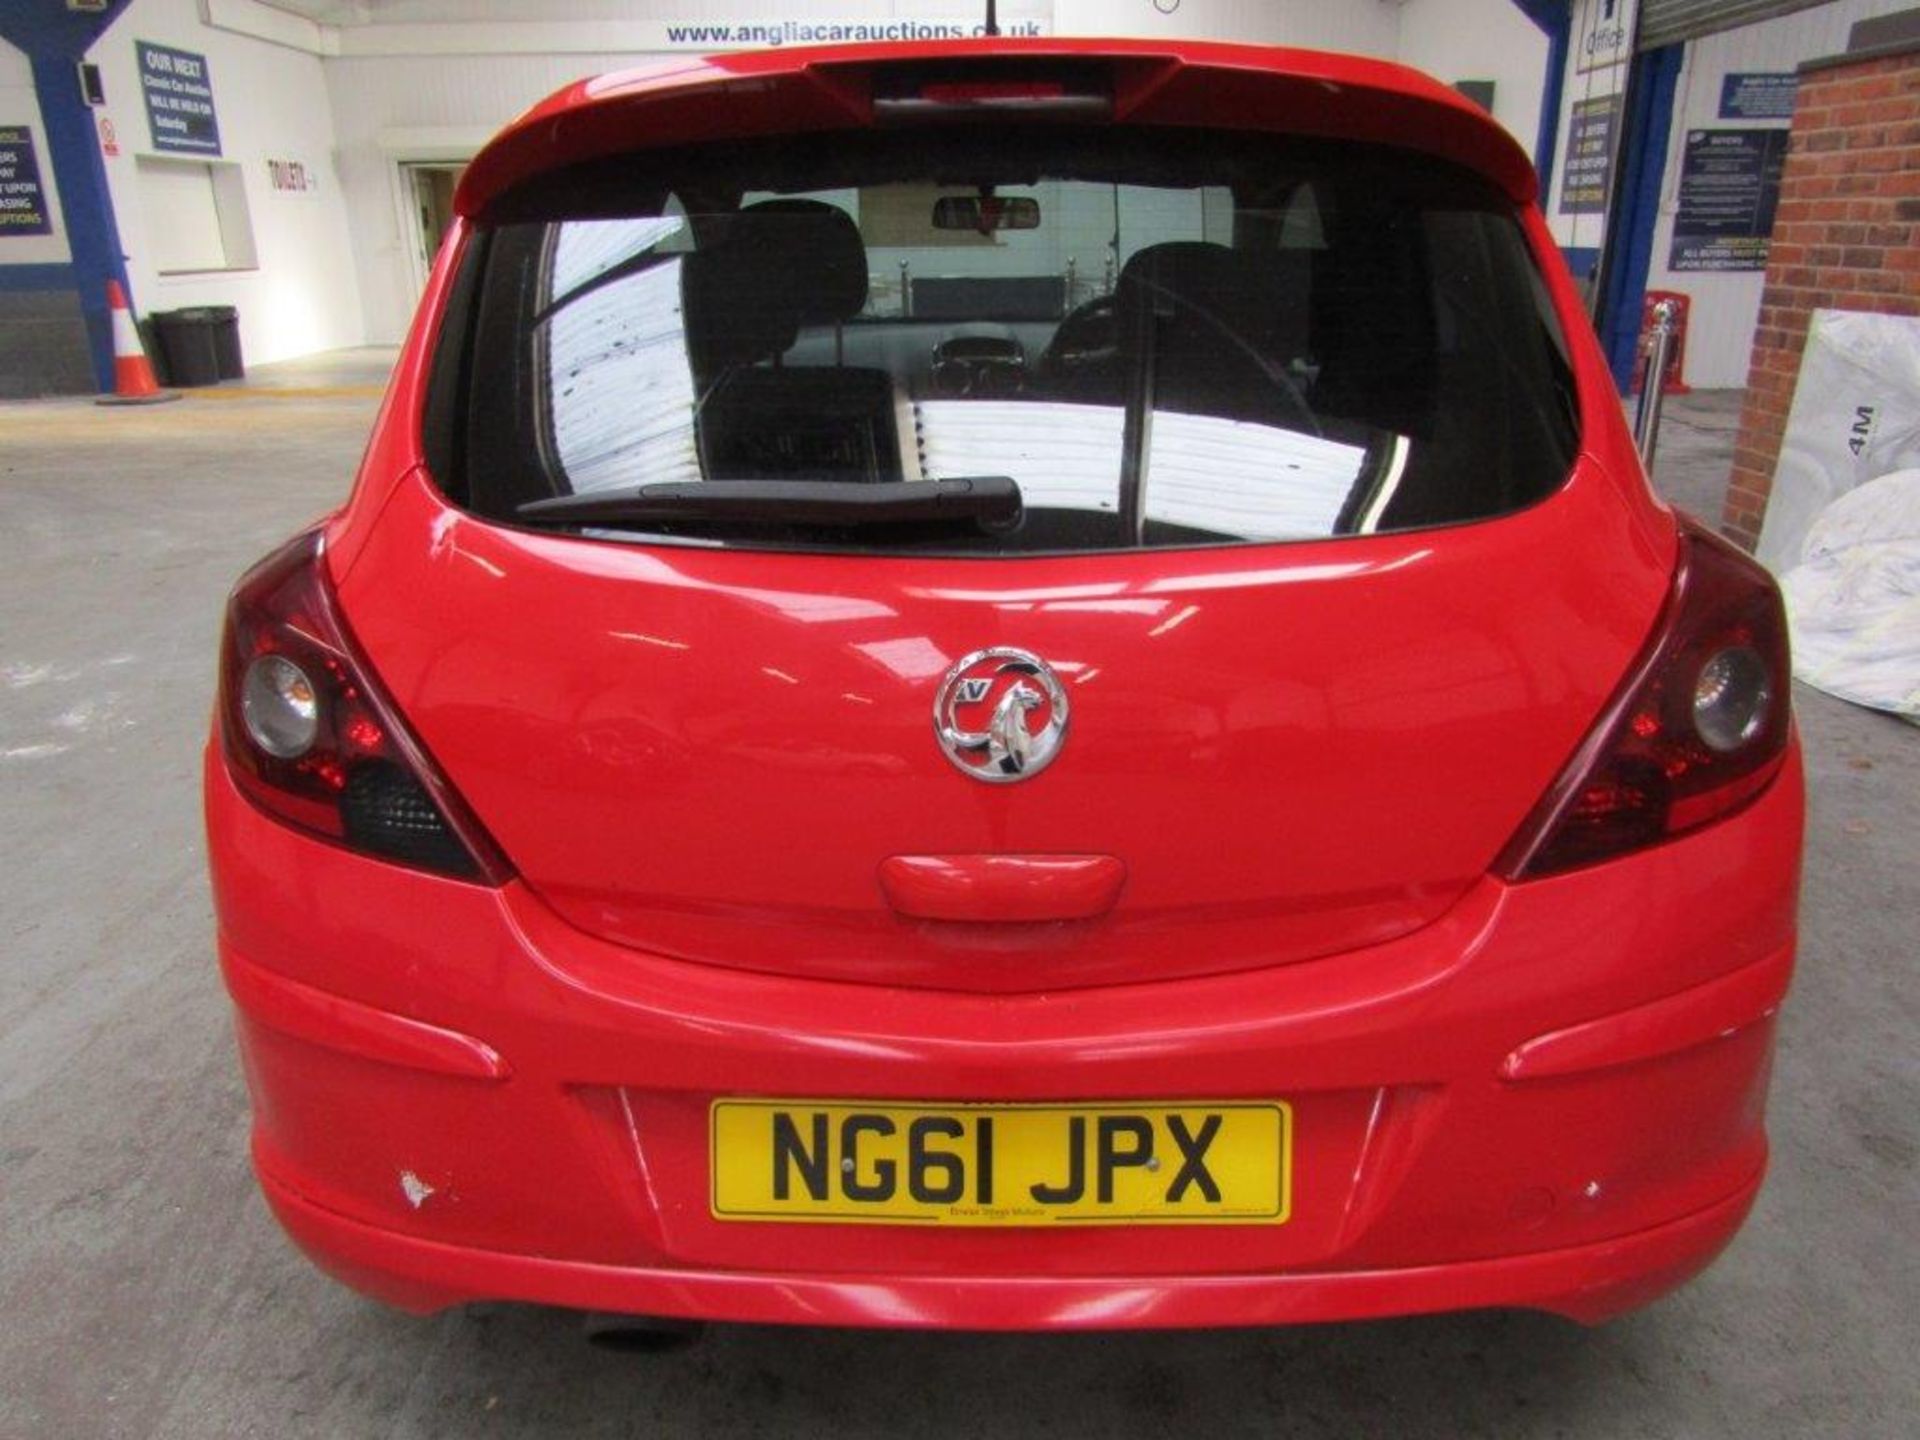 61 12 Vauxhall Corsa Limited Edition - Image 11 of 27